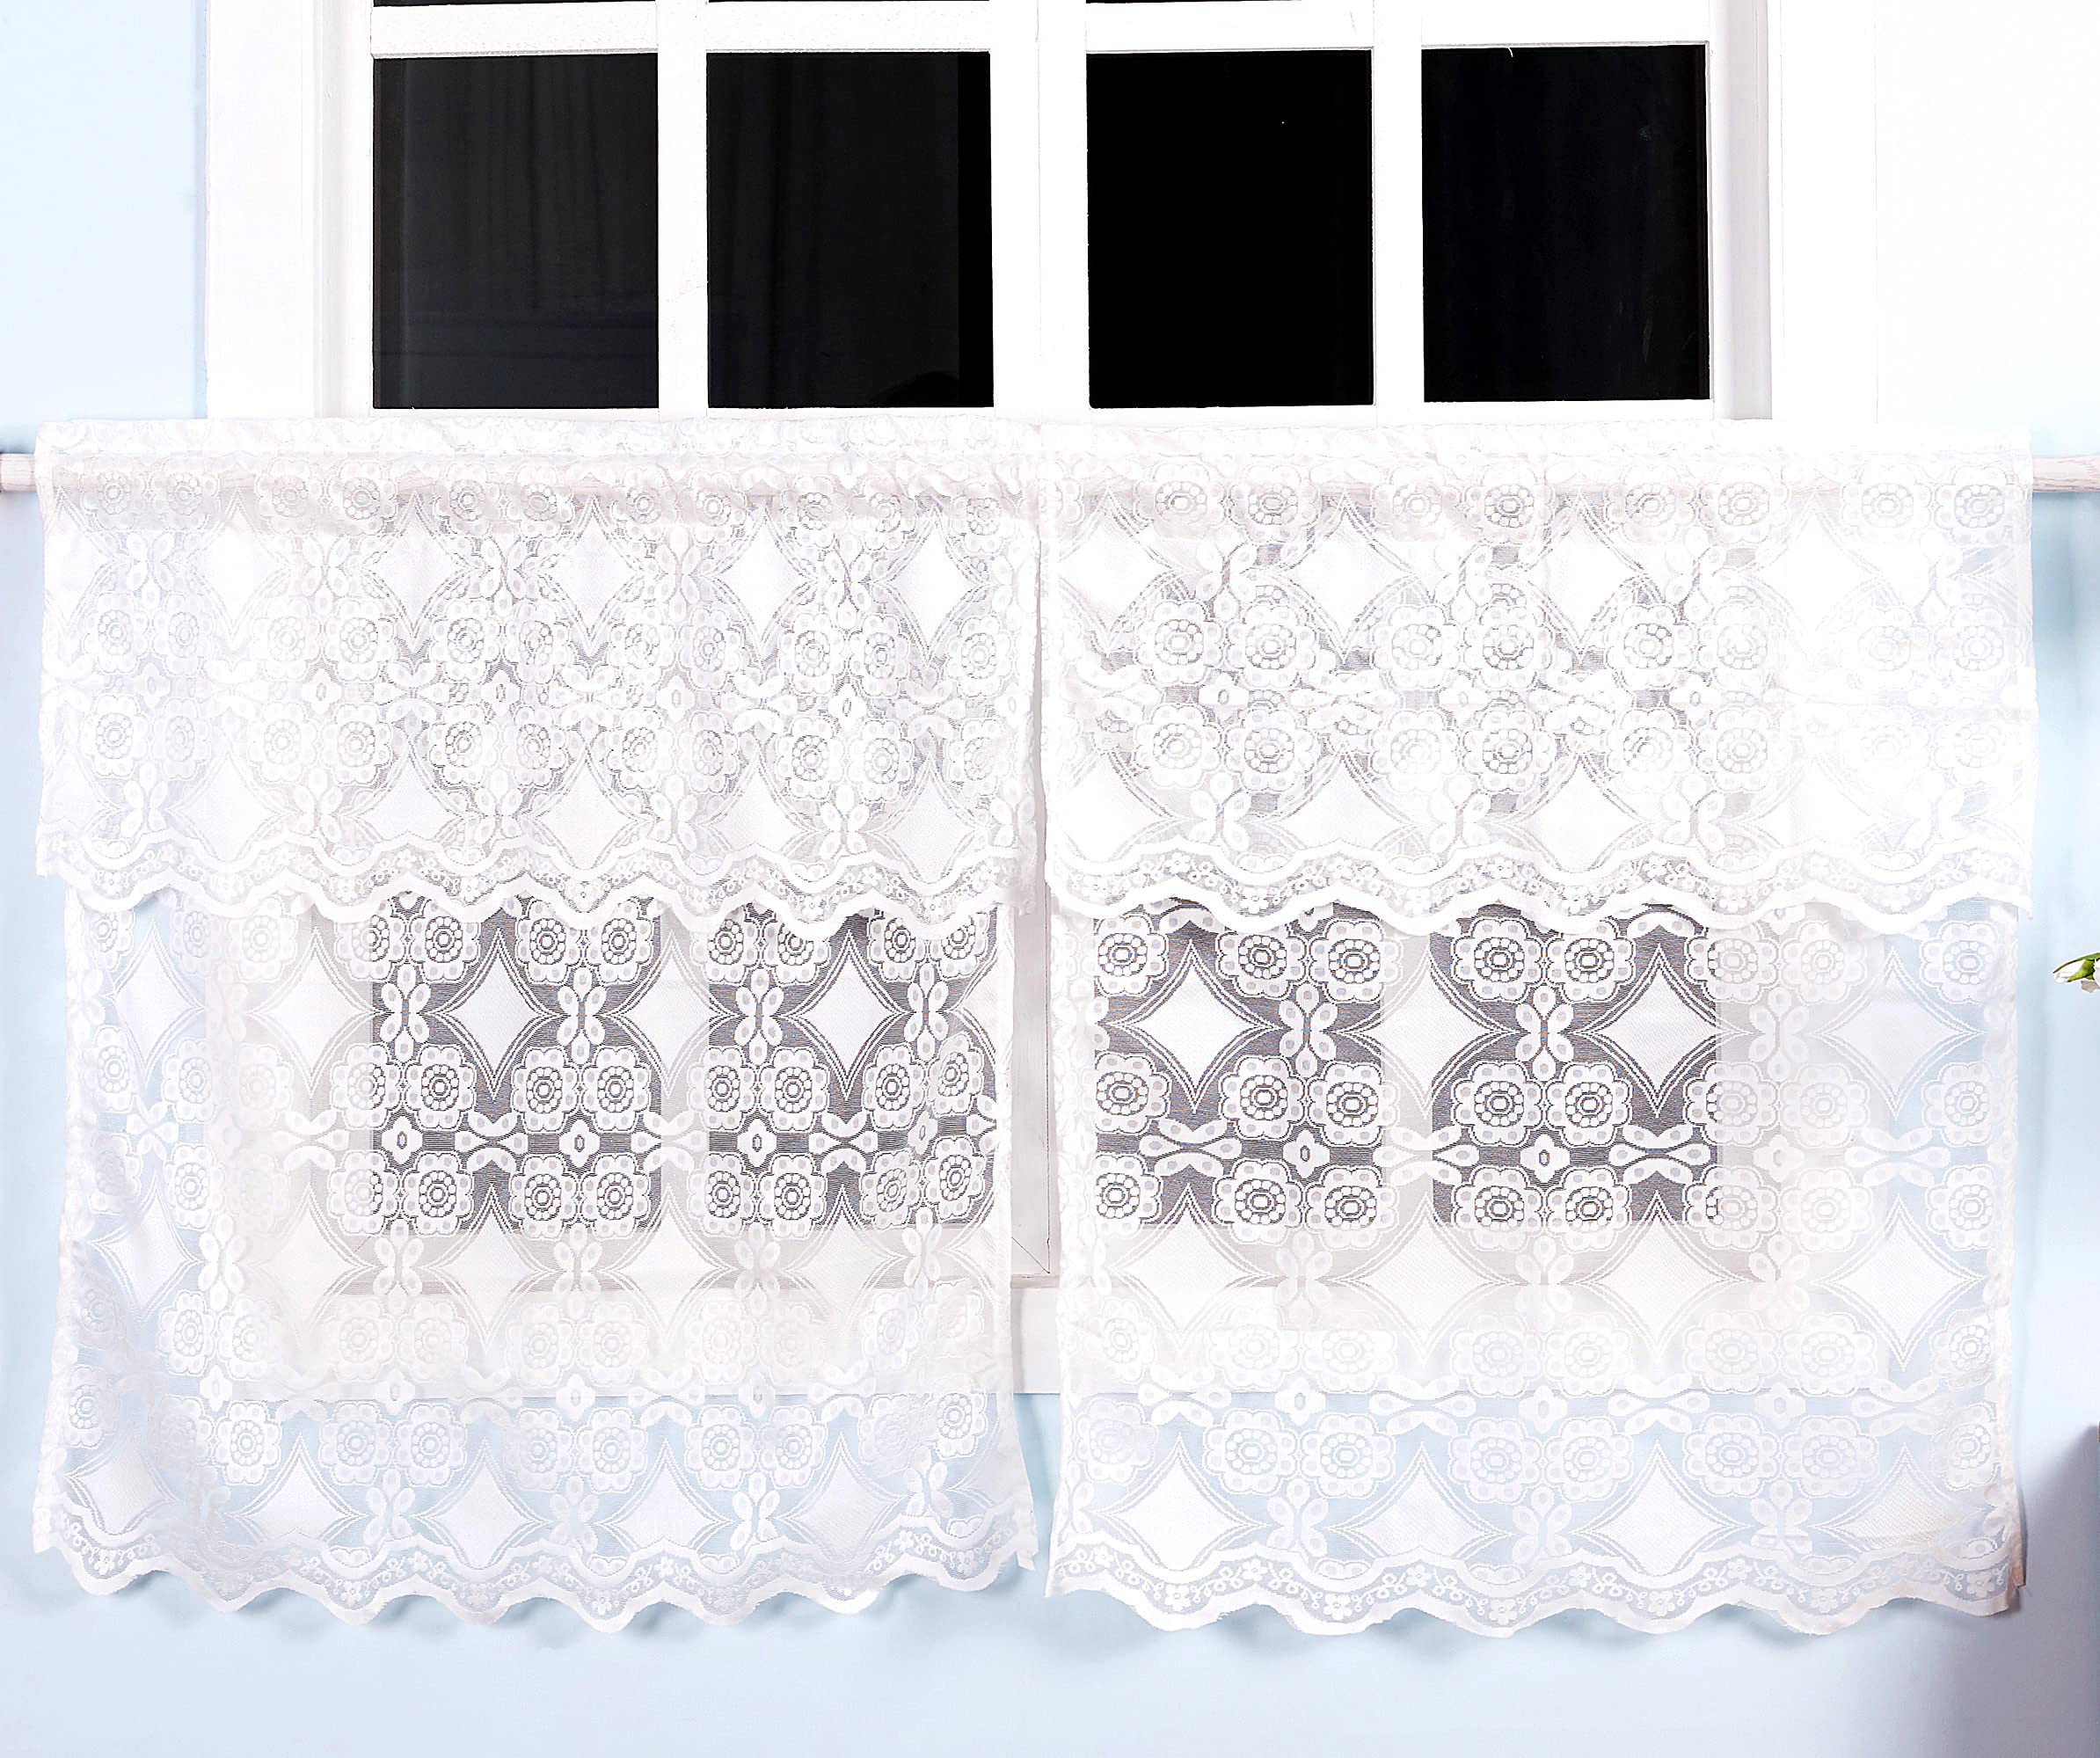 Molaxhome Lace Curtains 29 x 36 inch, 2 Pack White Kitchen Tiers Sheer Rod Pocket Voile for Small Bathroom Window Treatment (29 x 36 inch, White)